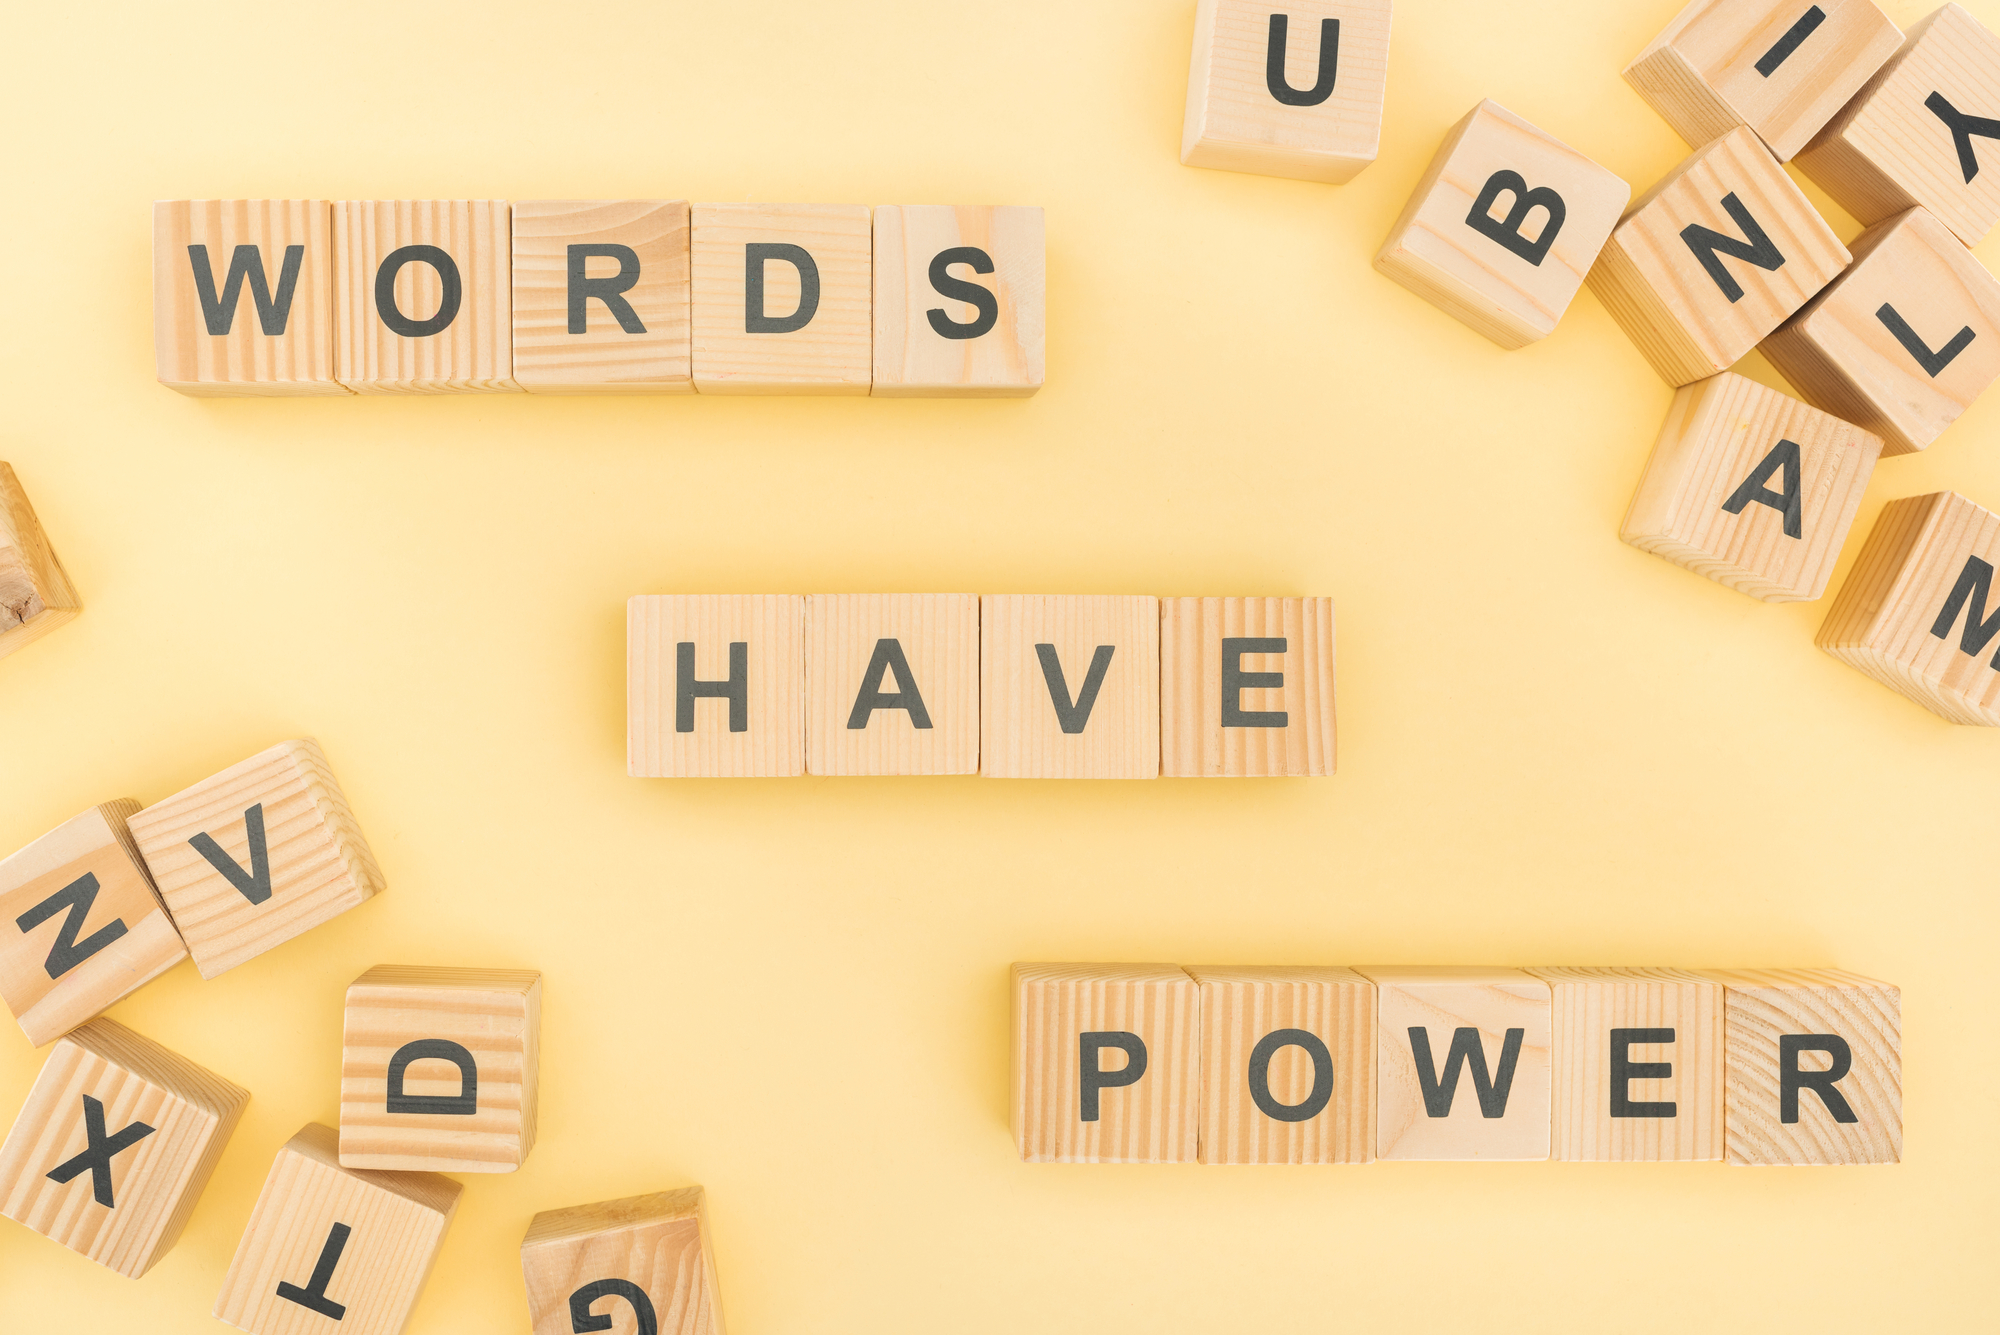 Three Things to Consider With Brand Voice and Word Choice